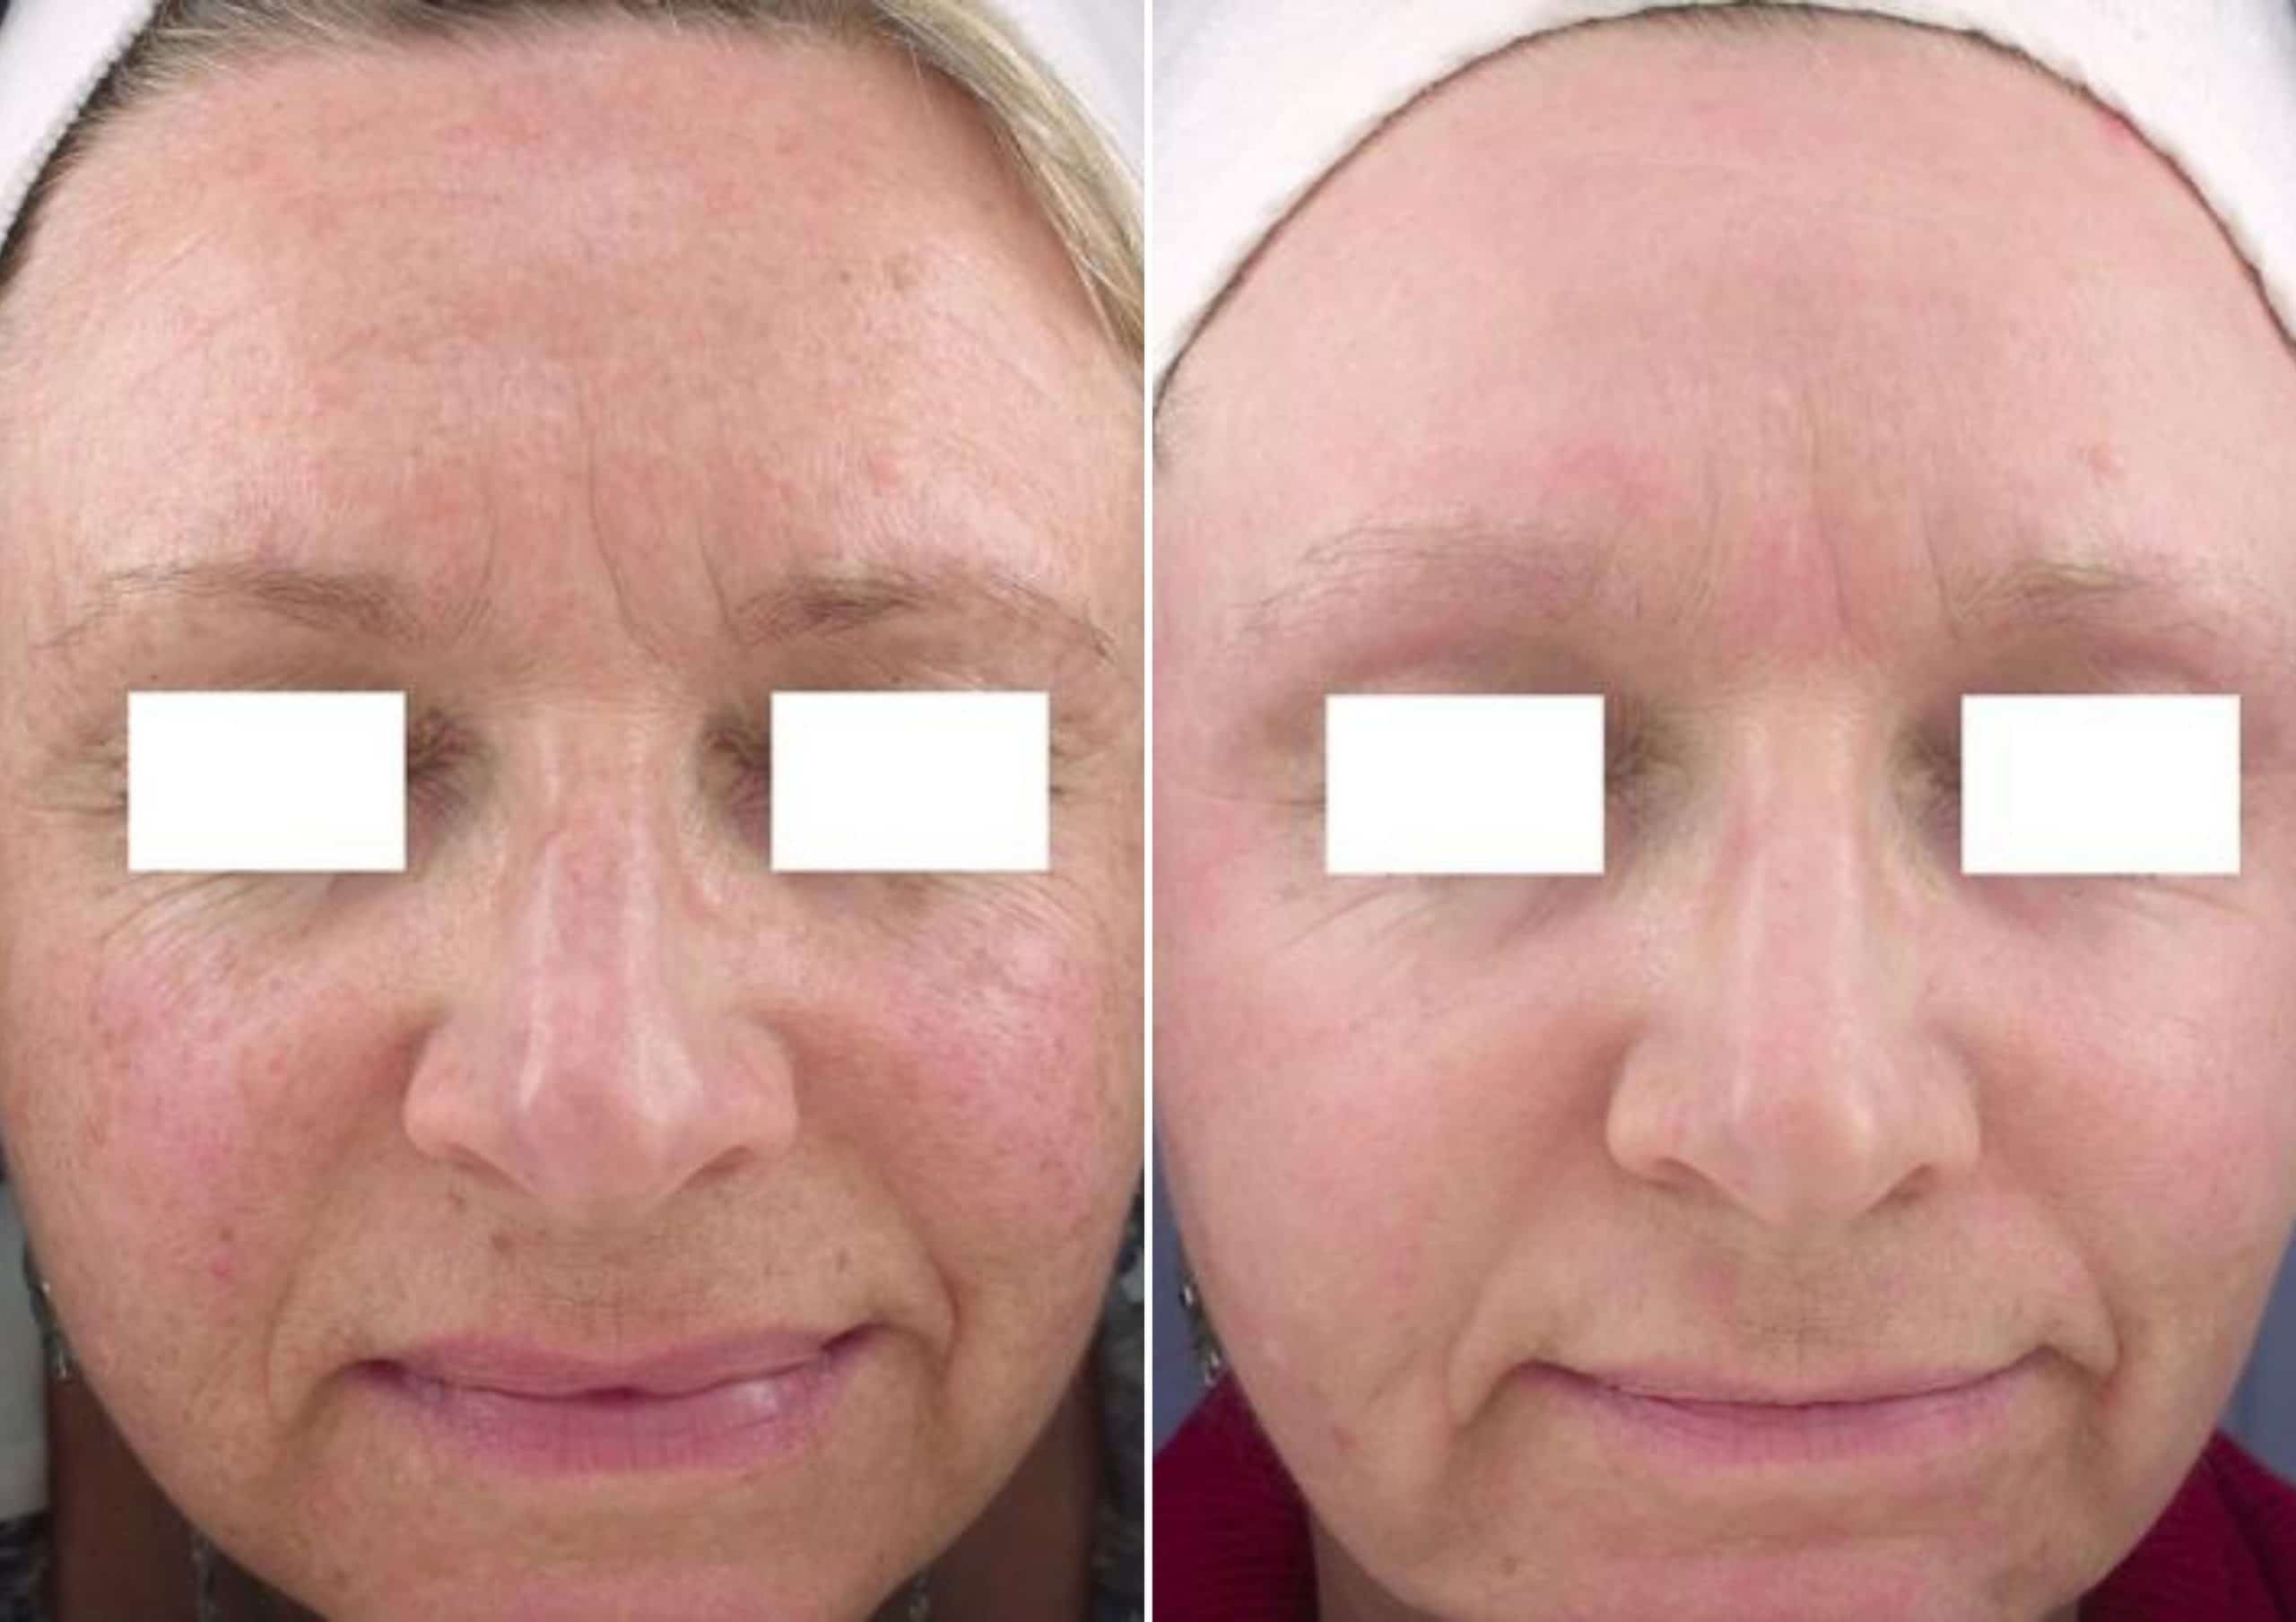 Before and after results of improved skin complexion with CO2RE Laser Resurfacing treatment in Salt Lake City.